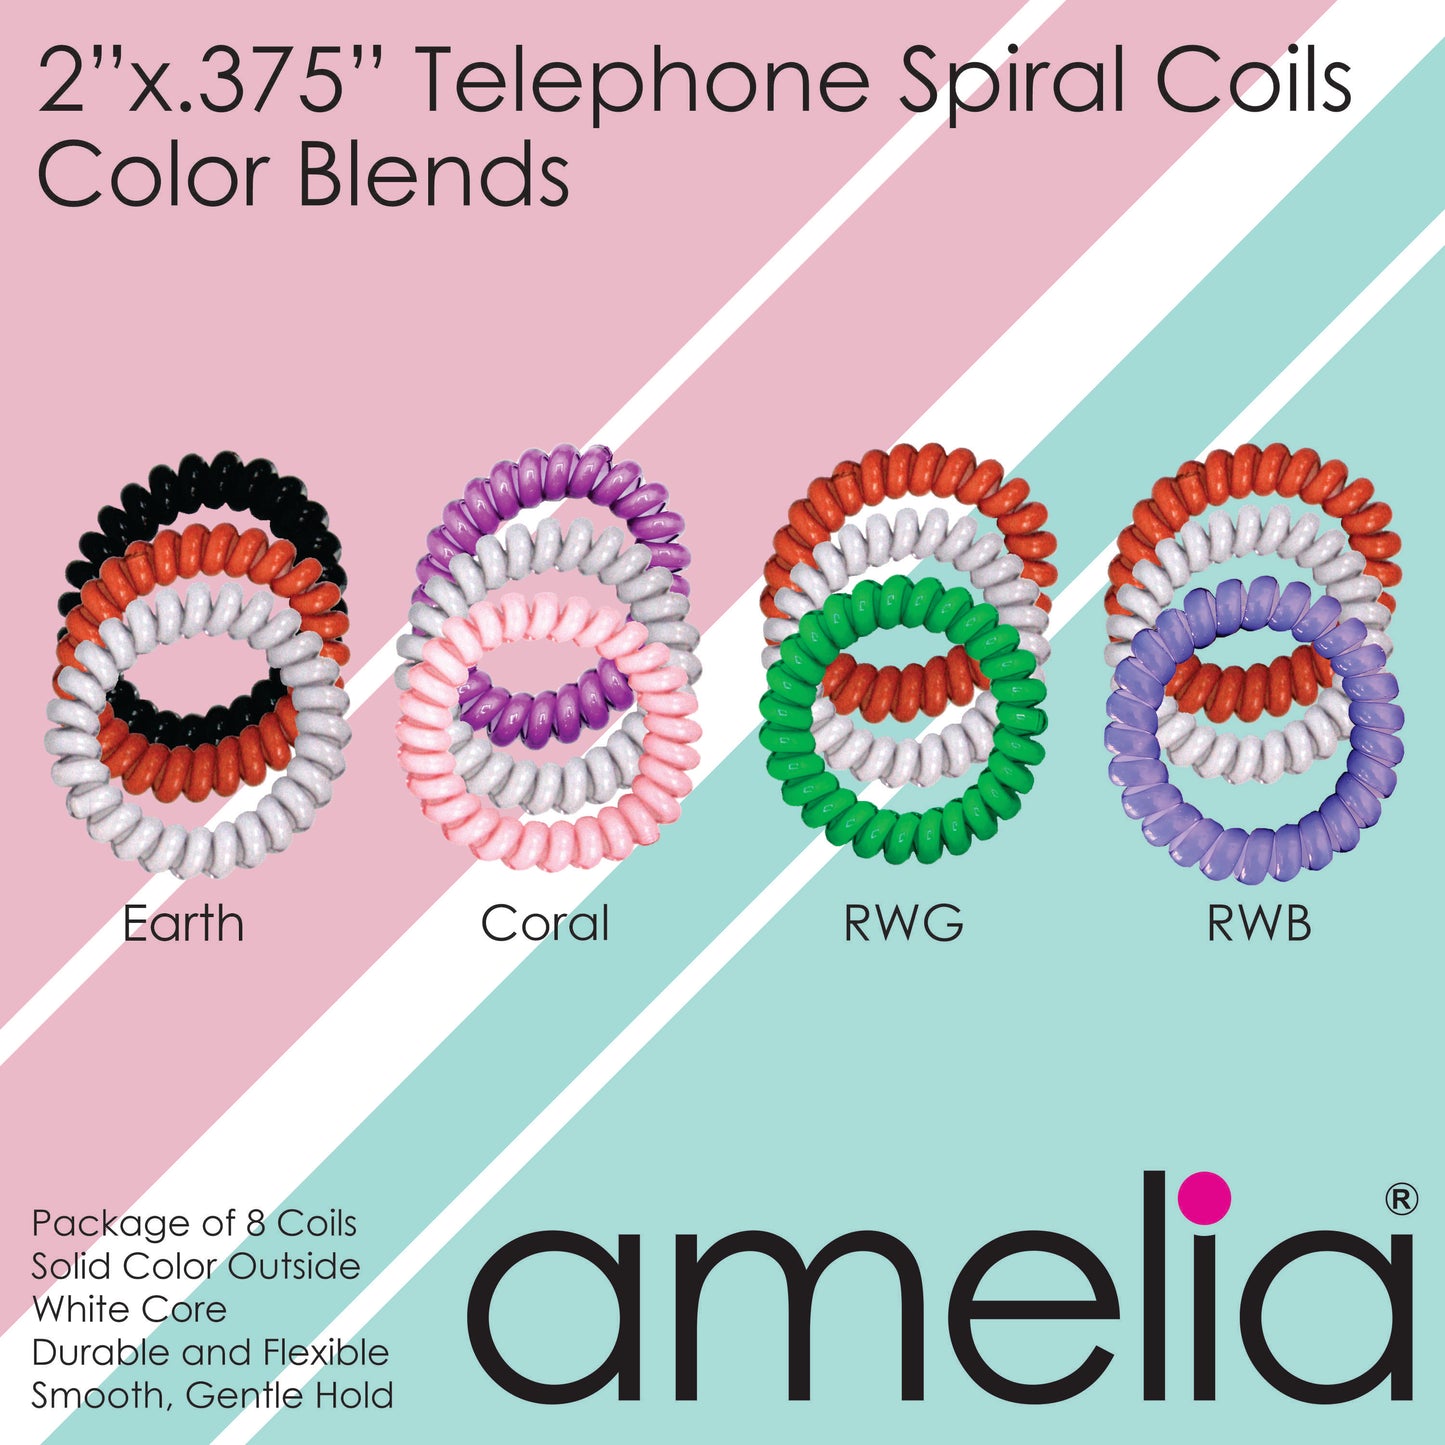 Amelia Beauty Products 8 Medium Elastic Hair Coils, 2.0in Diameter Thick Spiral Hair Ties, Gentle on Hair, Strong Hold and Minimizes Dents and Creases, Black